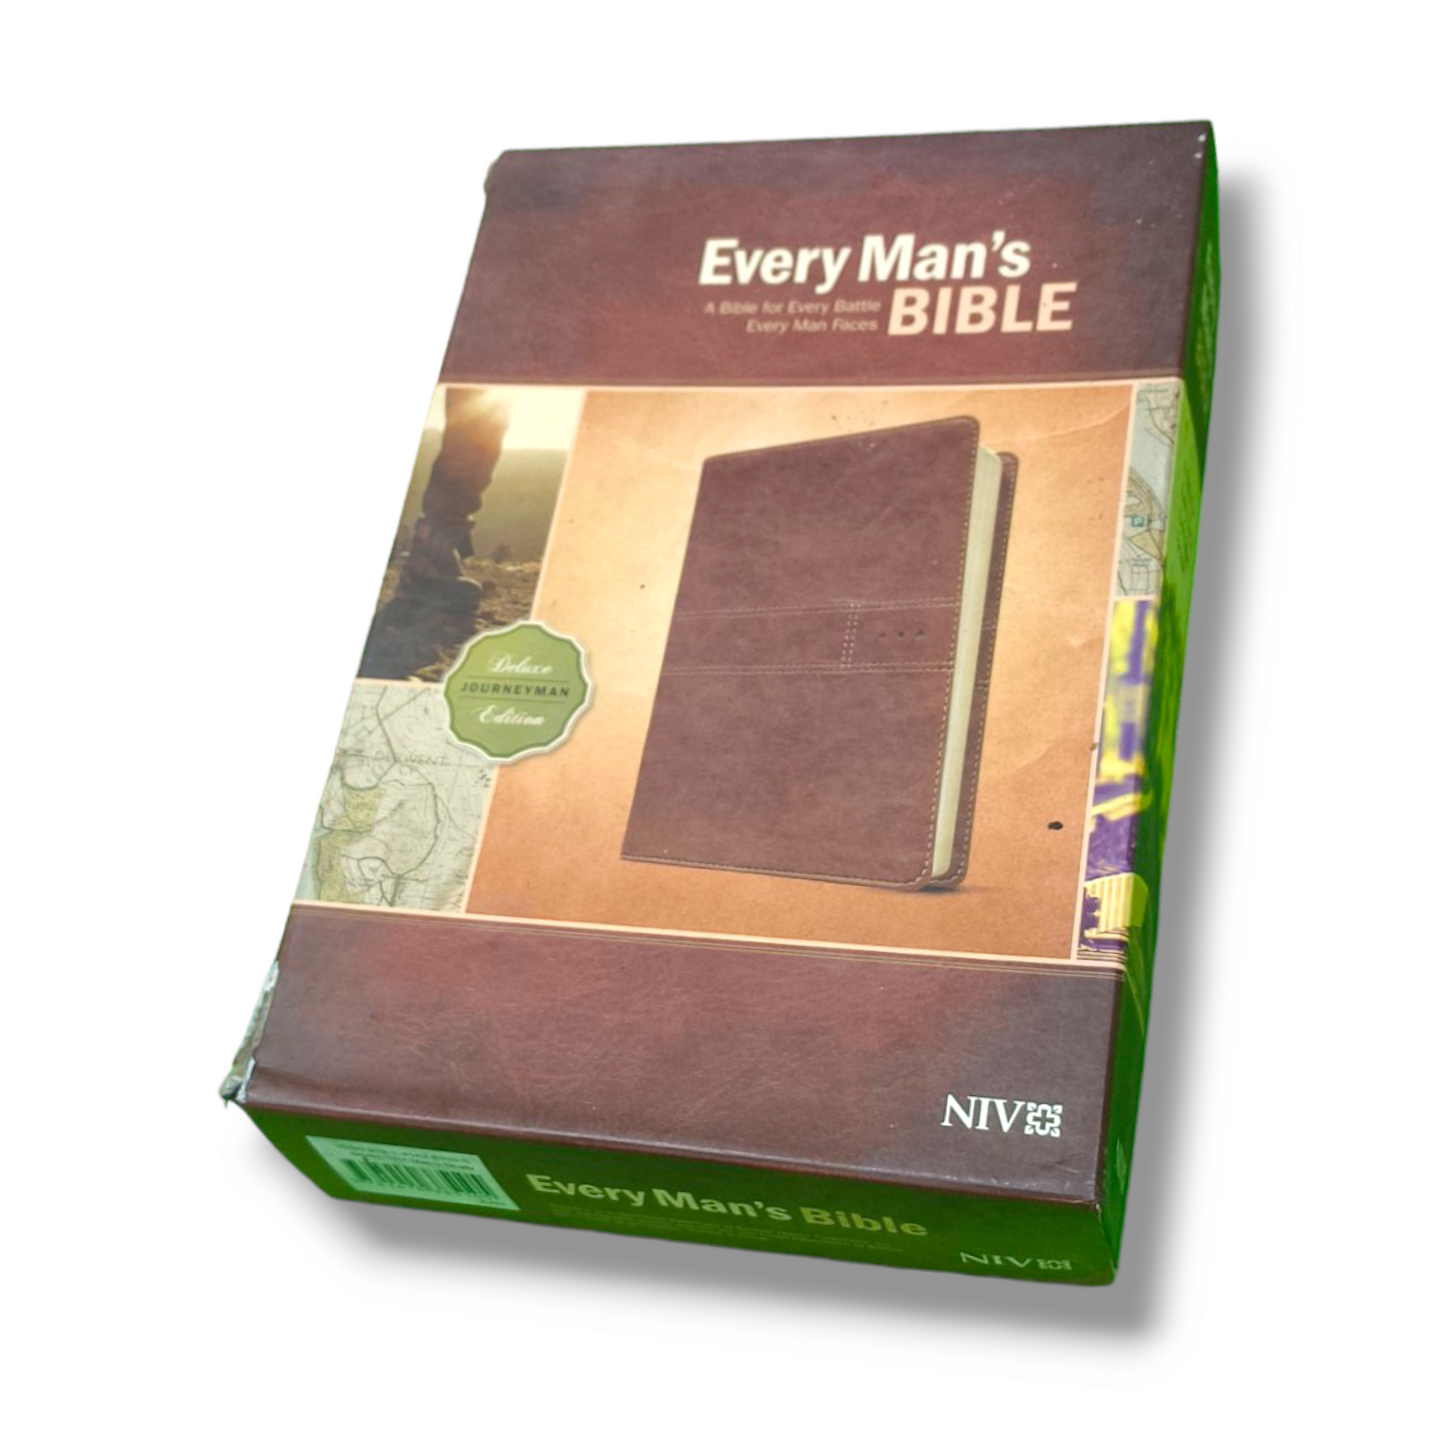 NIV Every Man's Bible | Deluxe Journeyman Edition Leather Brown | Study Bible | New Edition